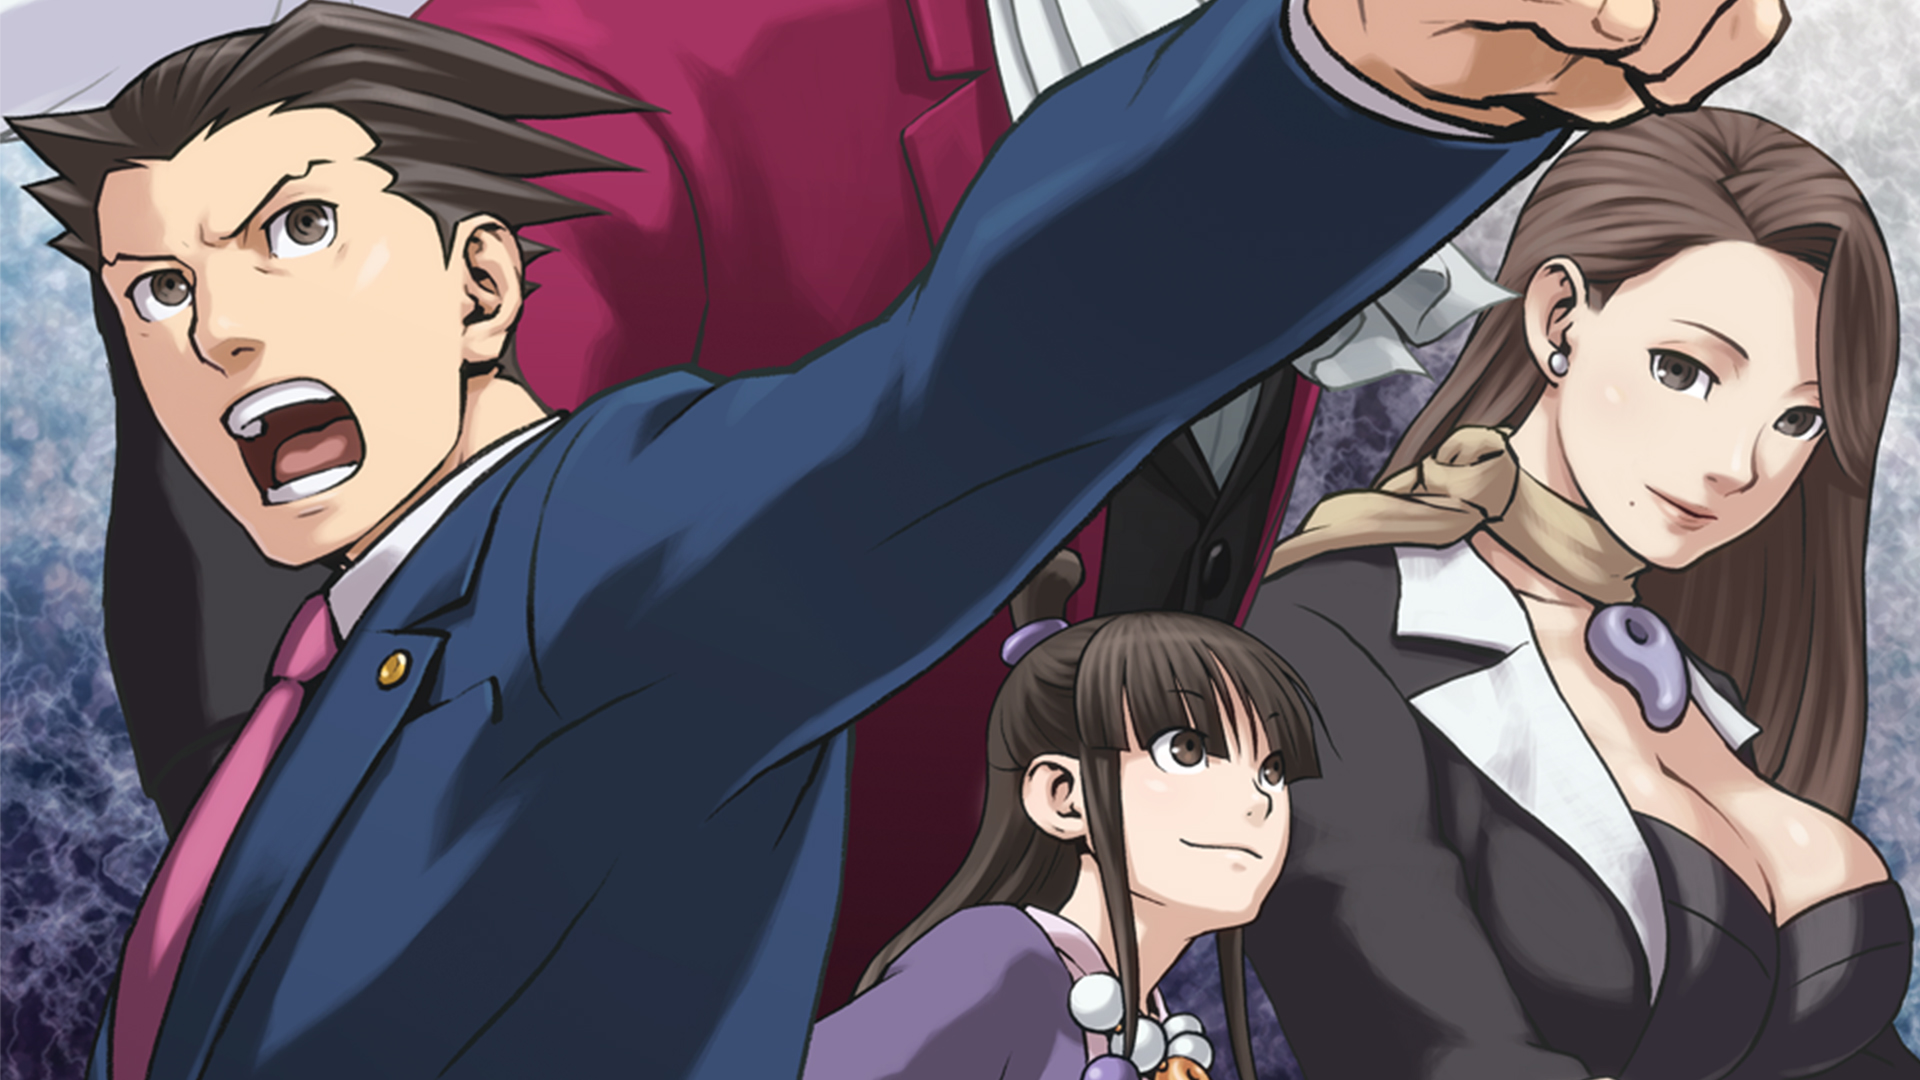 Phoenix Wright: Ace Attorney Episode 3 Anime Review - Sudden Twist - YouTube